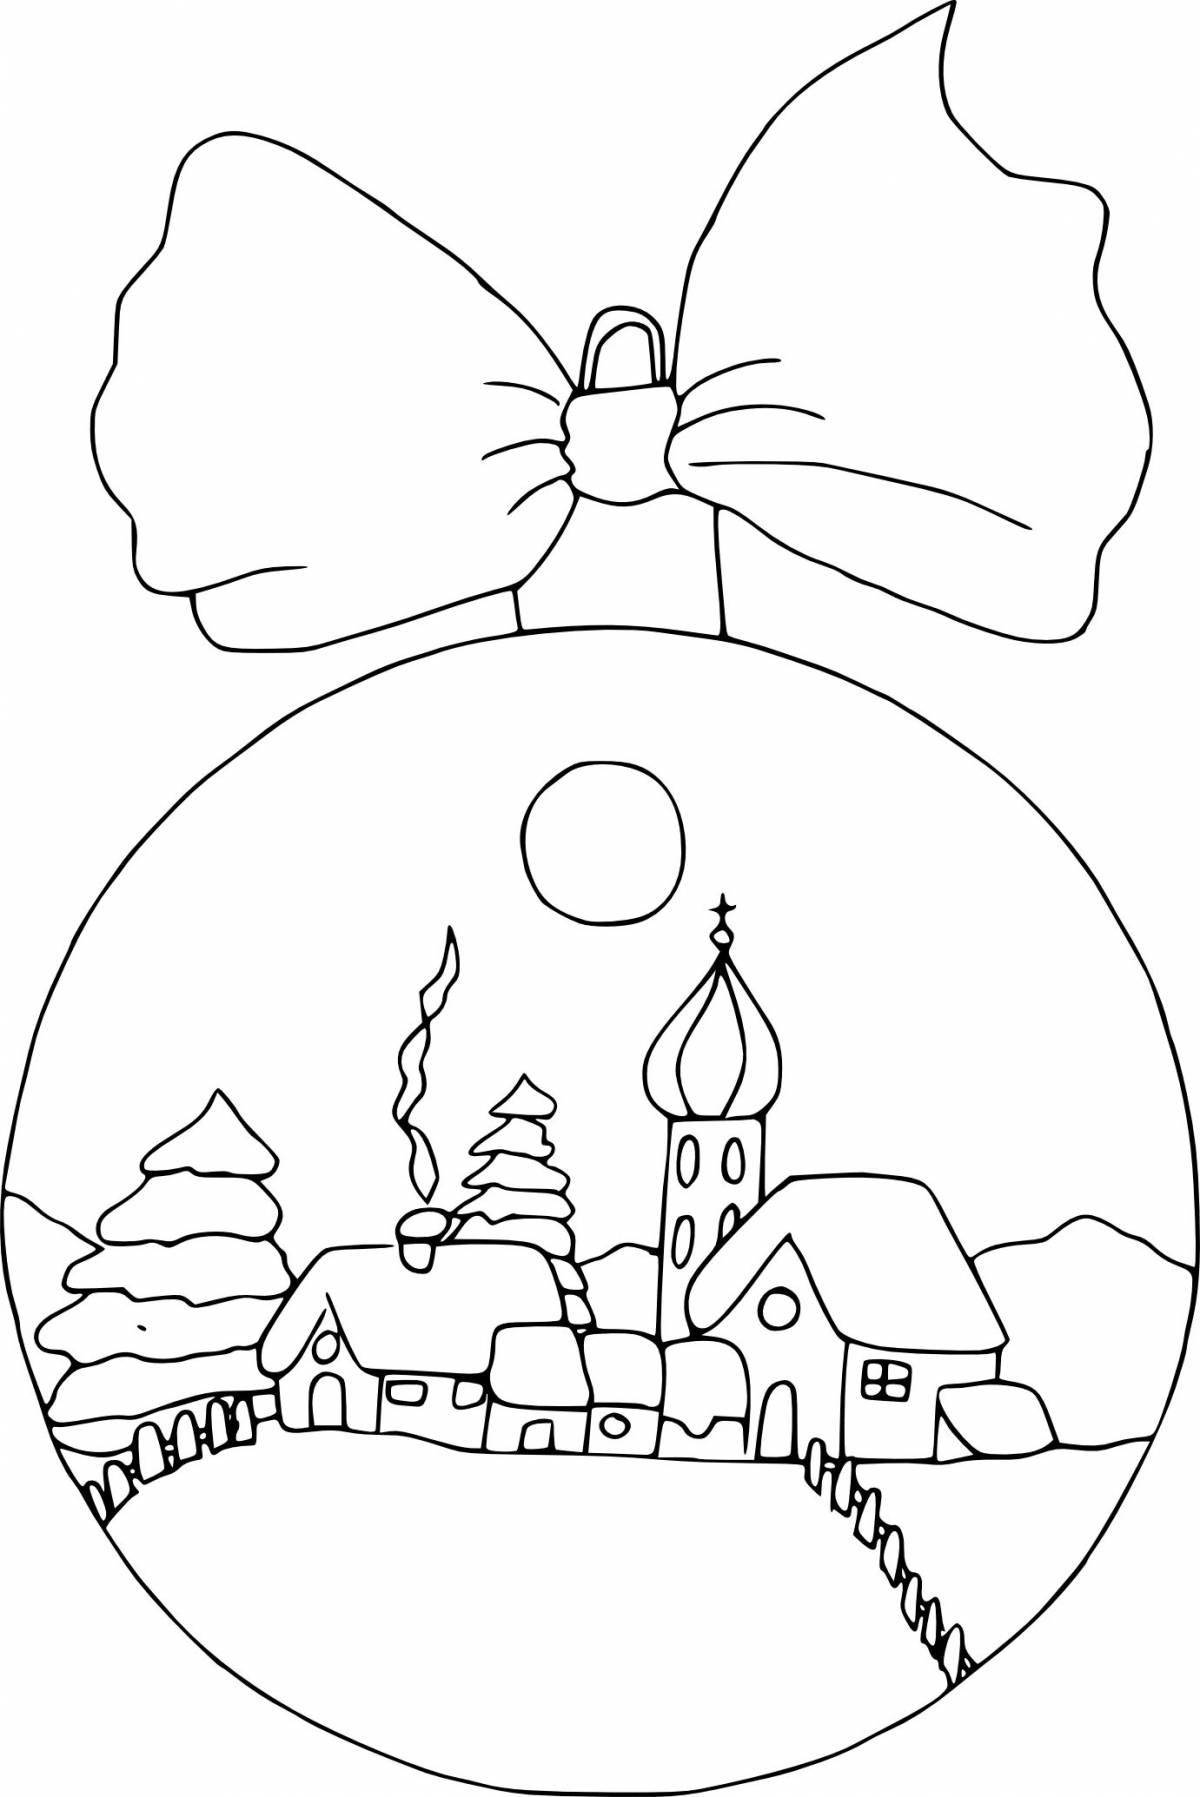 Fabulous Christmas toy ball coloring page